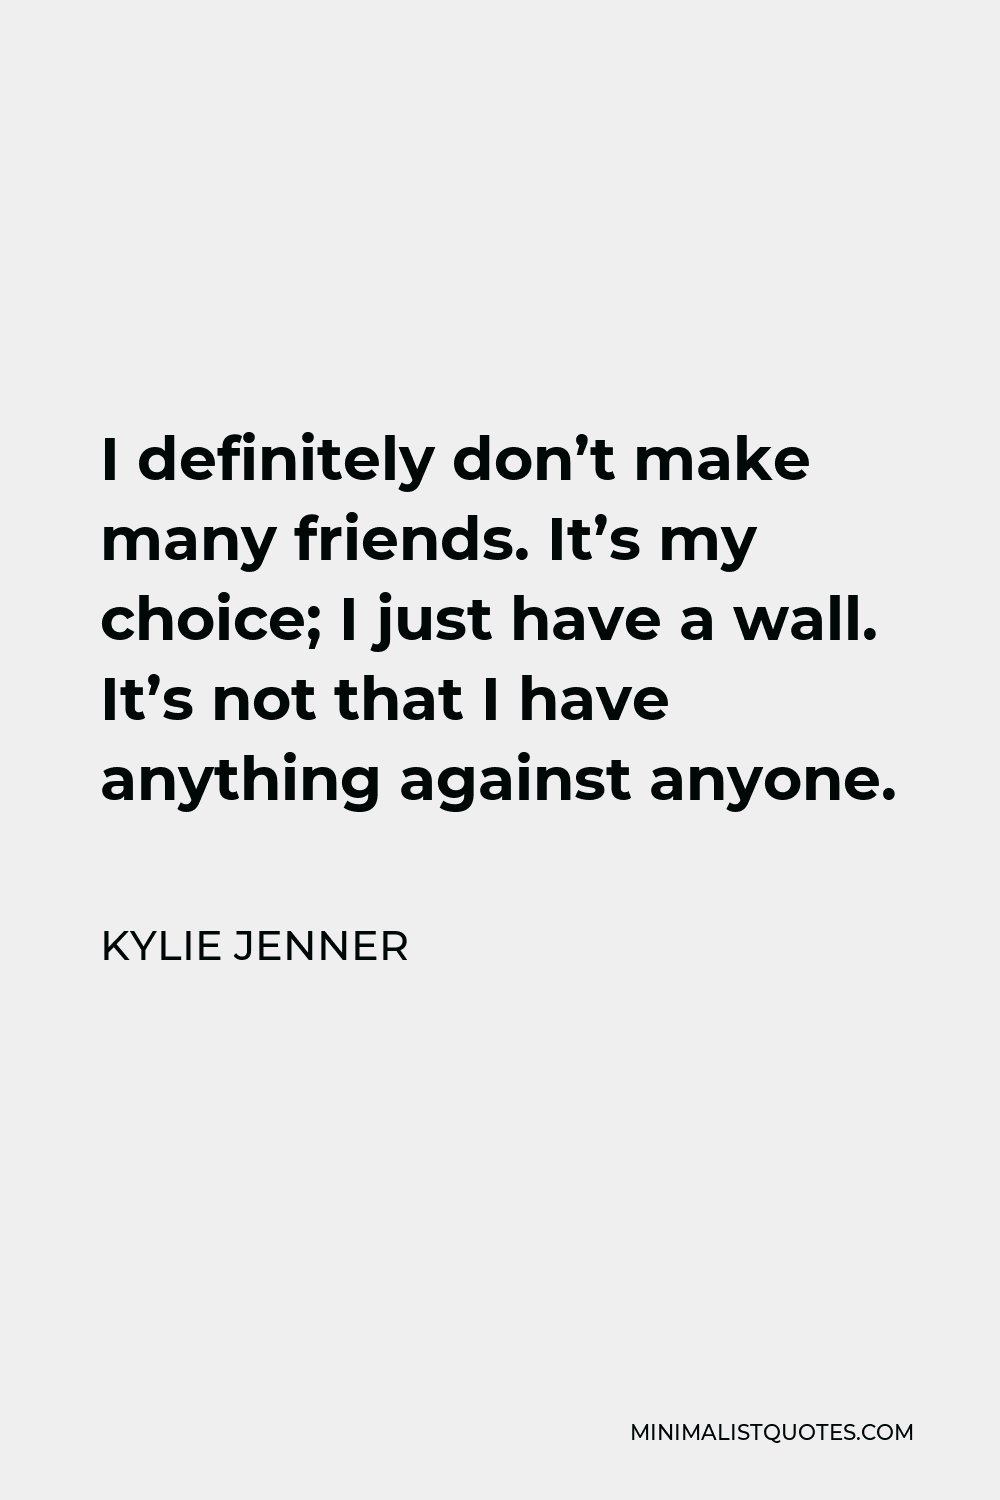 Kylie Jenner Quote - I definitely don’t make many friends. It’s my choice; I just have a wall. It’s not that I have anything against anyone.